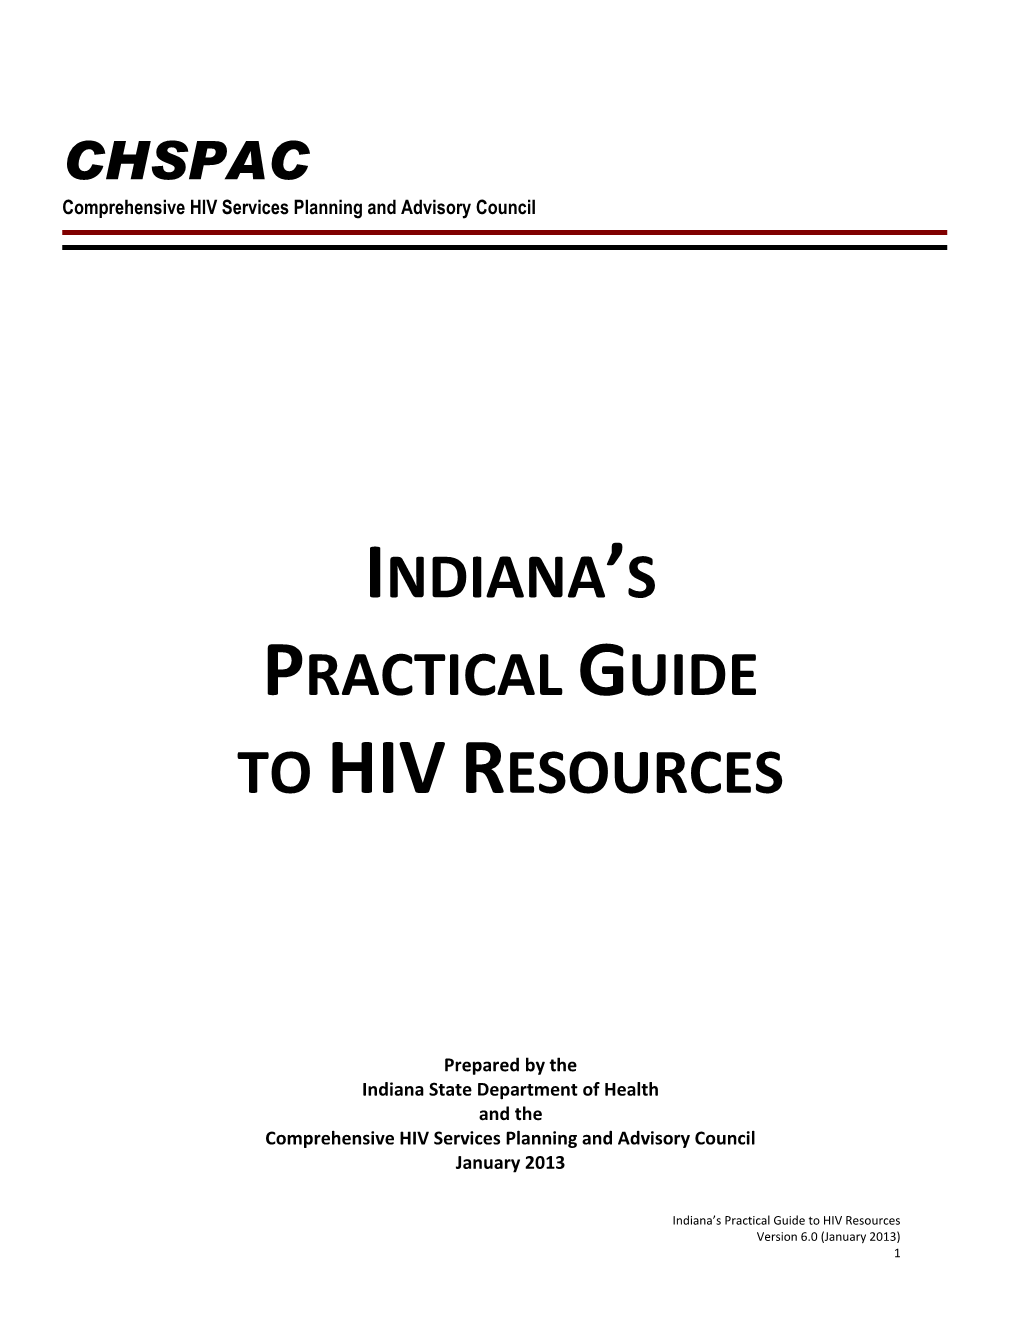 Indiana's Practical Guide to Hivresources